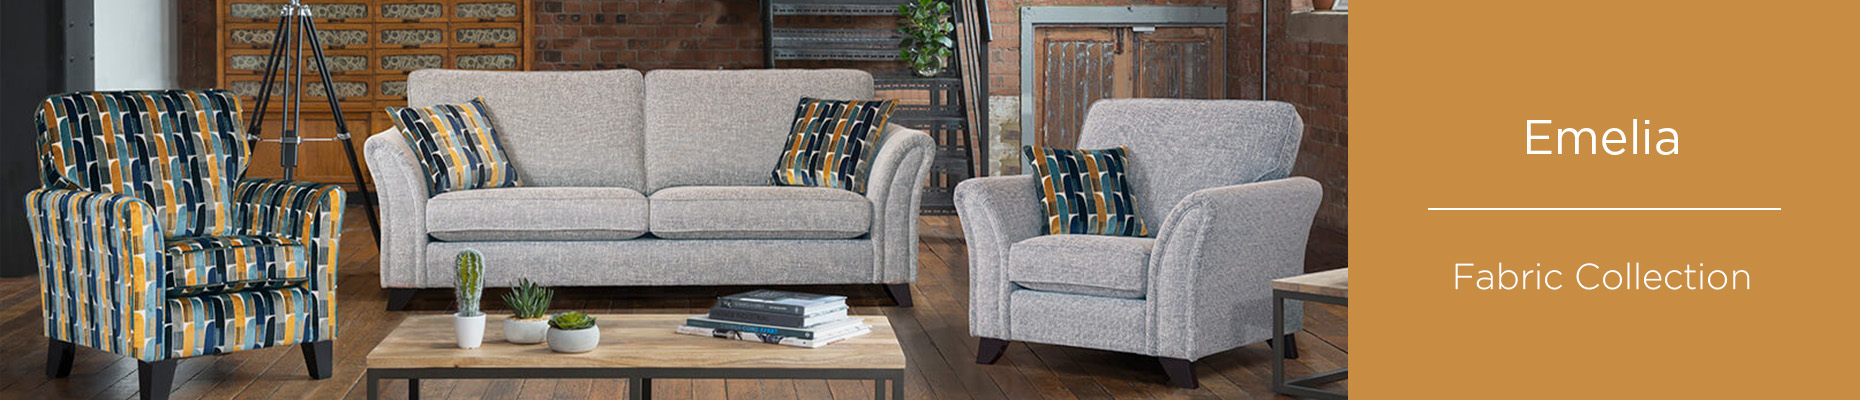 Emelia Fabric Sofa Collection at Forrest Furnishing